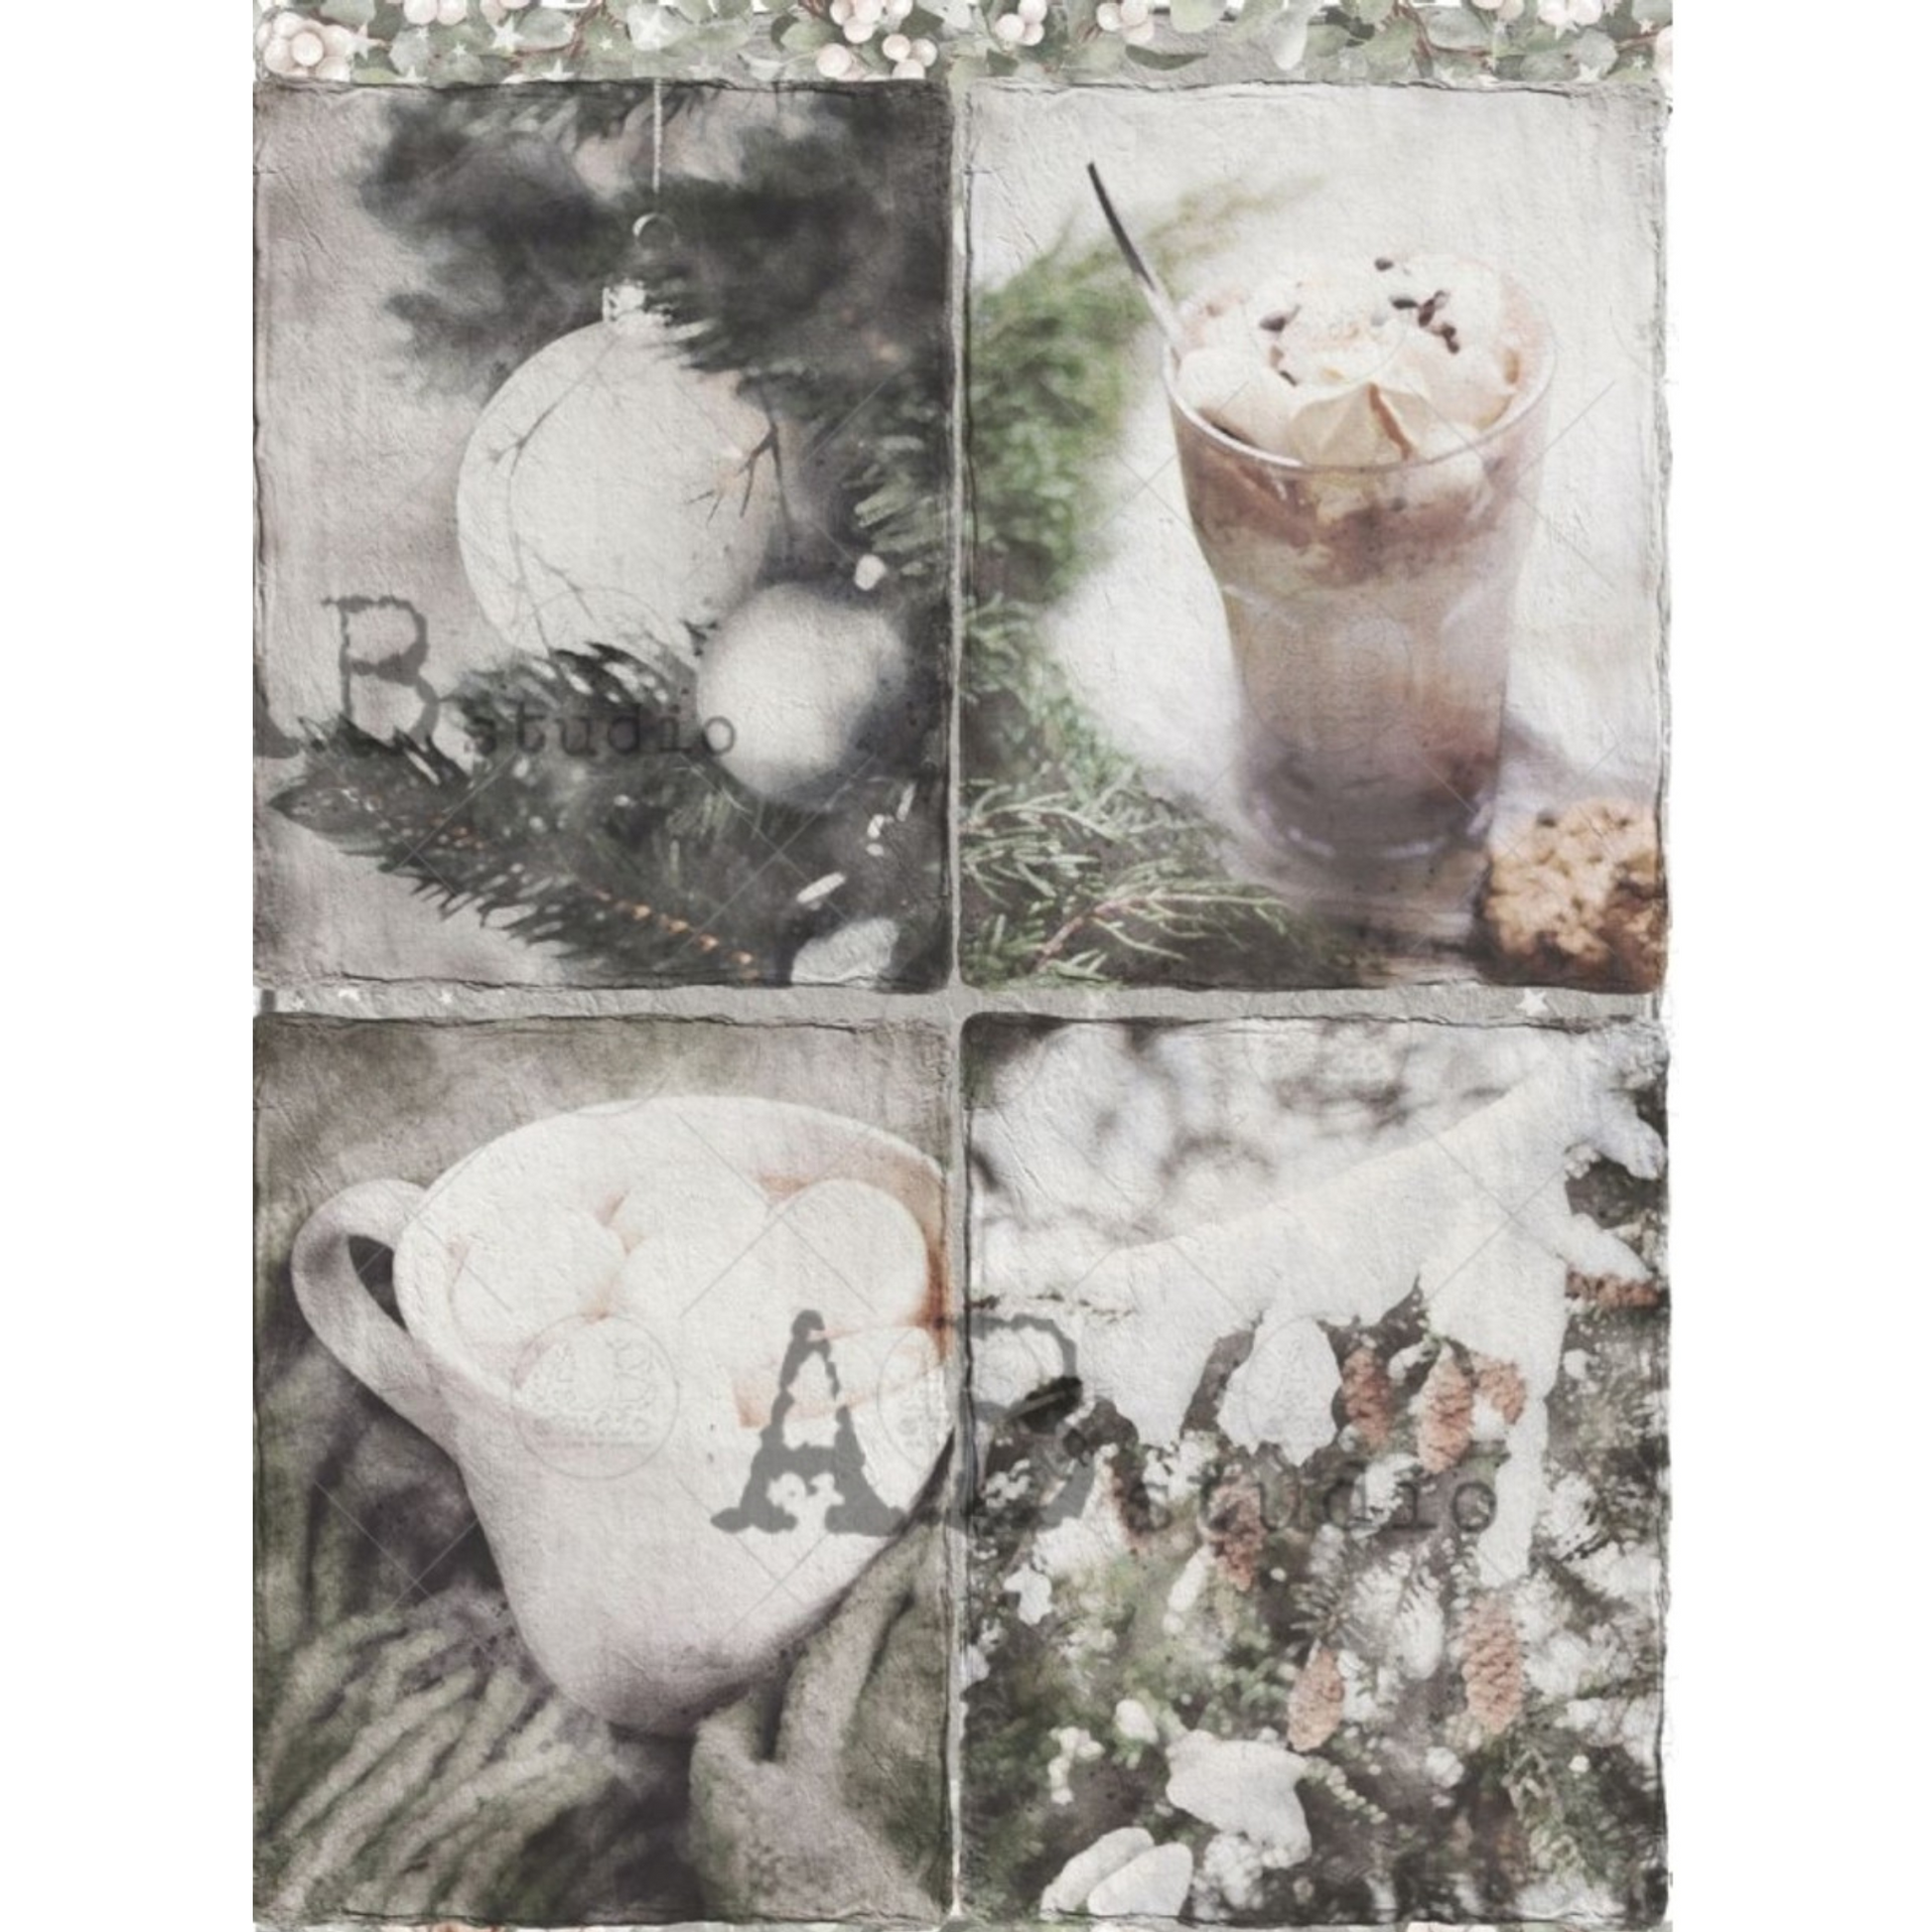 "4 Pack Nordic Christmas Scenes" decoupage rice paper by AB Studio. Available at Milton's Daughter.